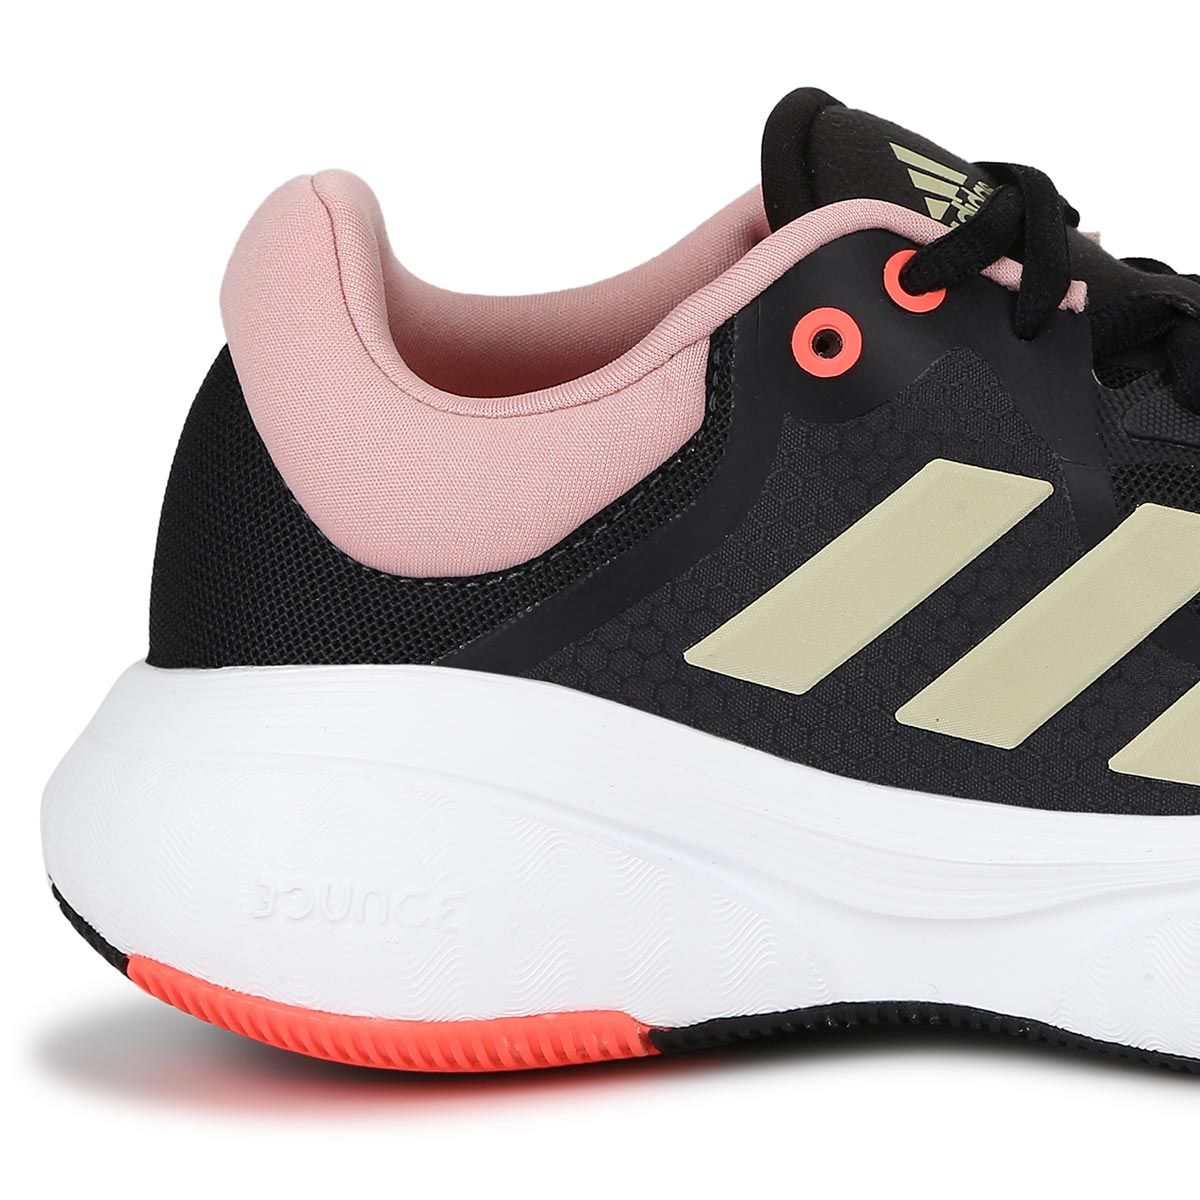 Best Adidas Gazelle Shoes - History, Specs and Top Styles to Buy Now